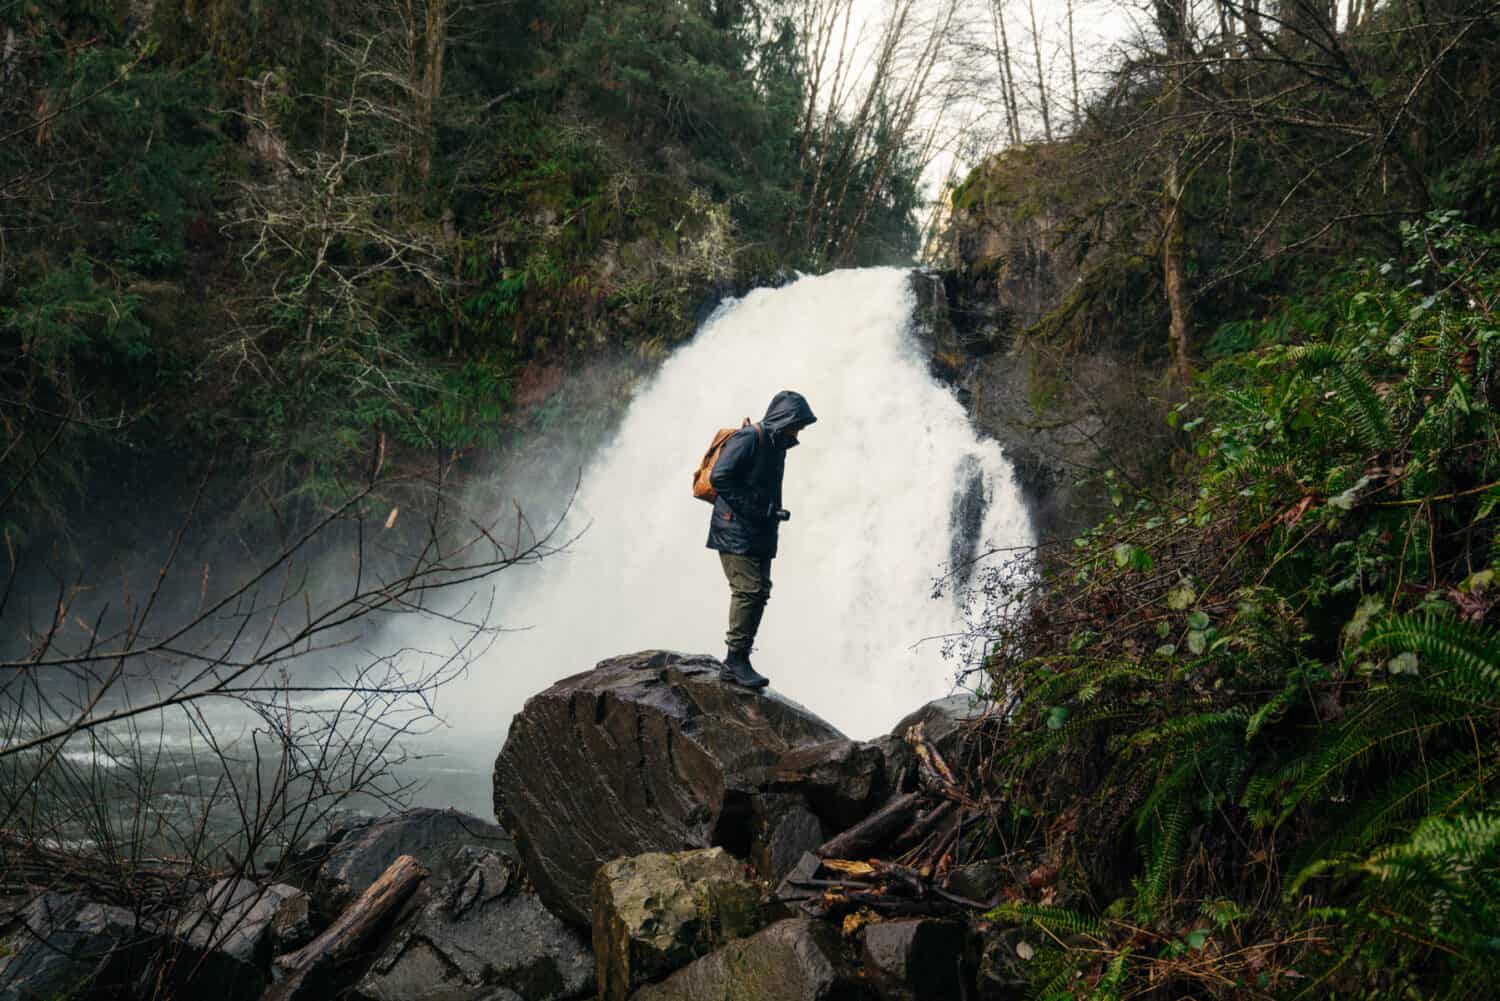 Berty Mandagie standing near Youngs River Falls on the Oregon Coast